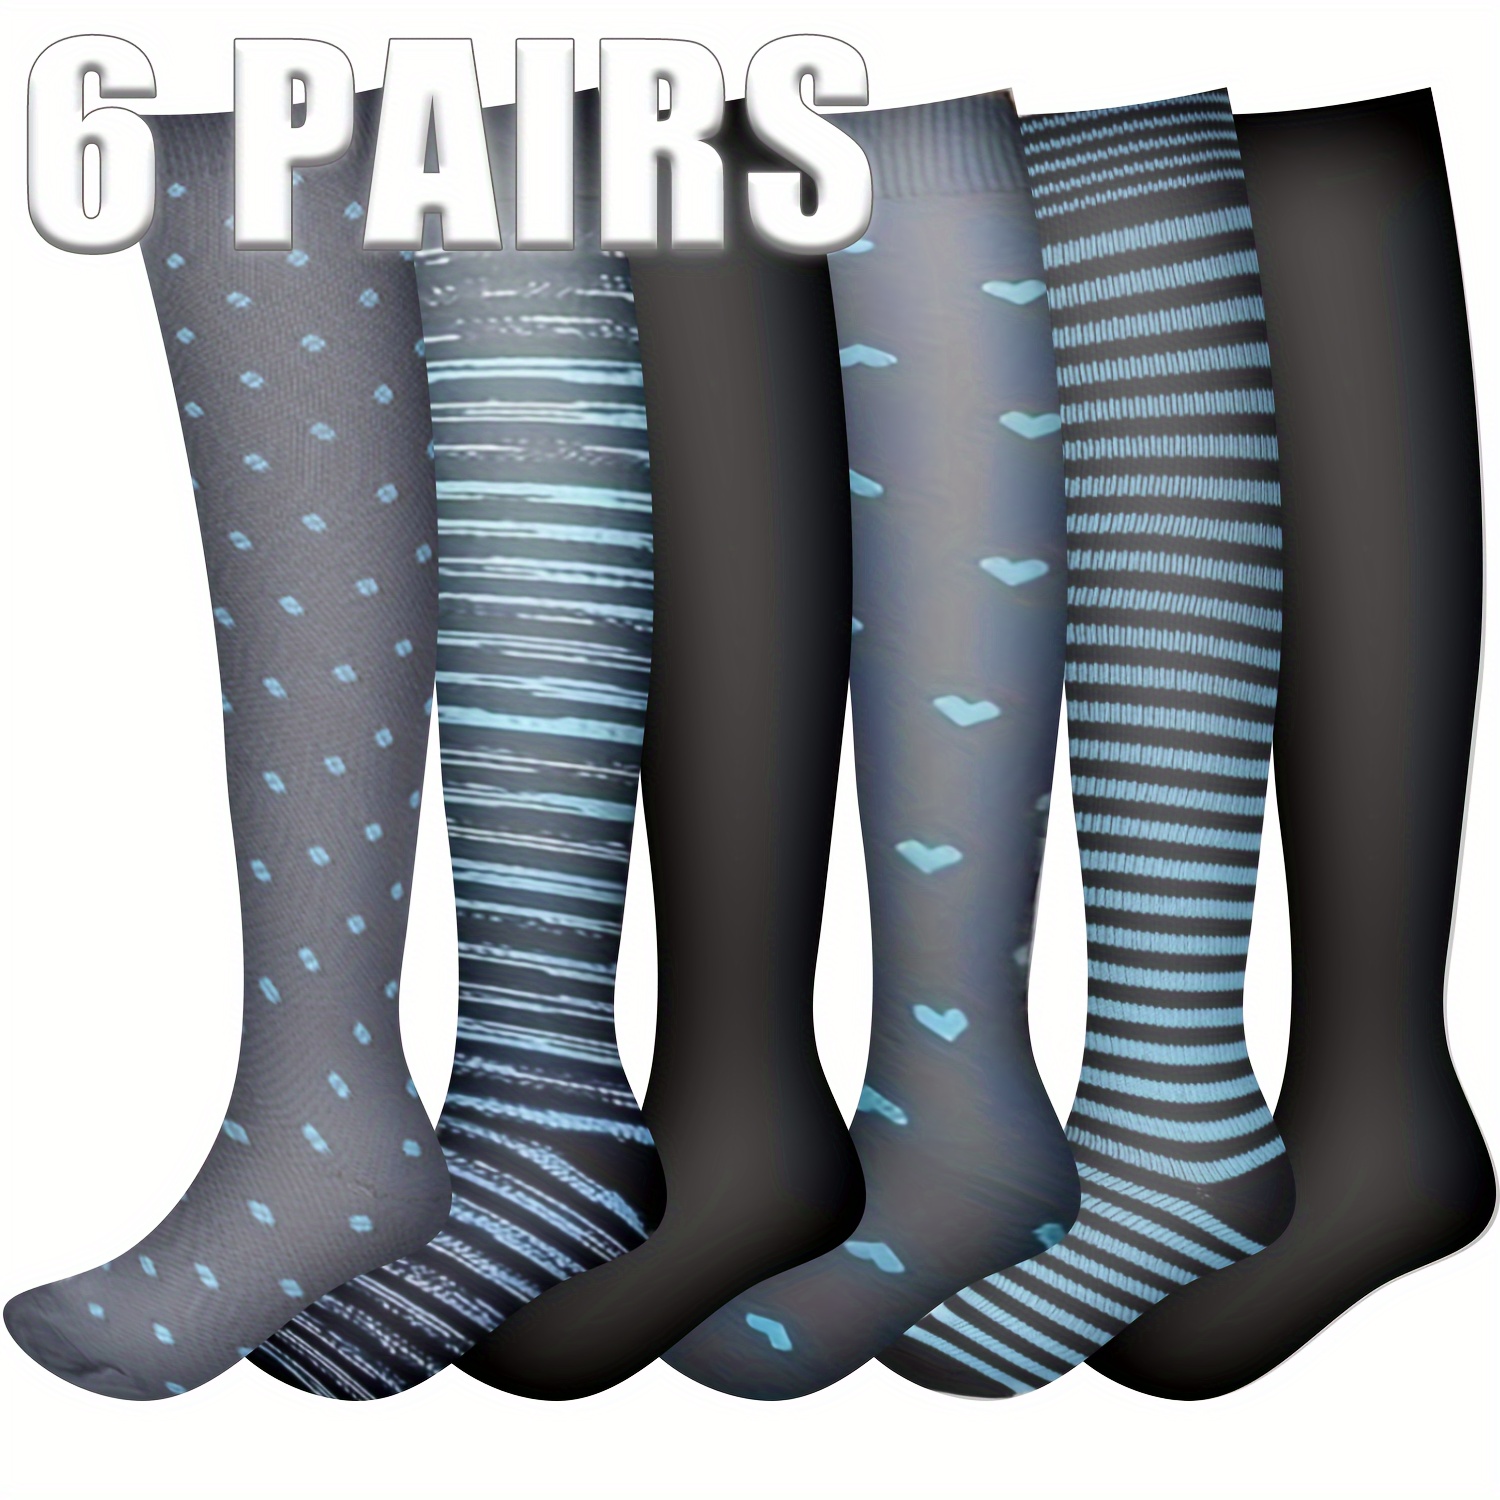 

6pairs Men's Striped Dot Over The Calf Stockings Breathable Comfy Socks Casual Socks Sports Workout Compression Socks For Outdoor Fitness Exercises Basketball Football Running Hiking